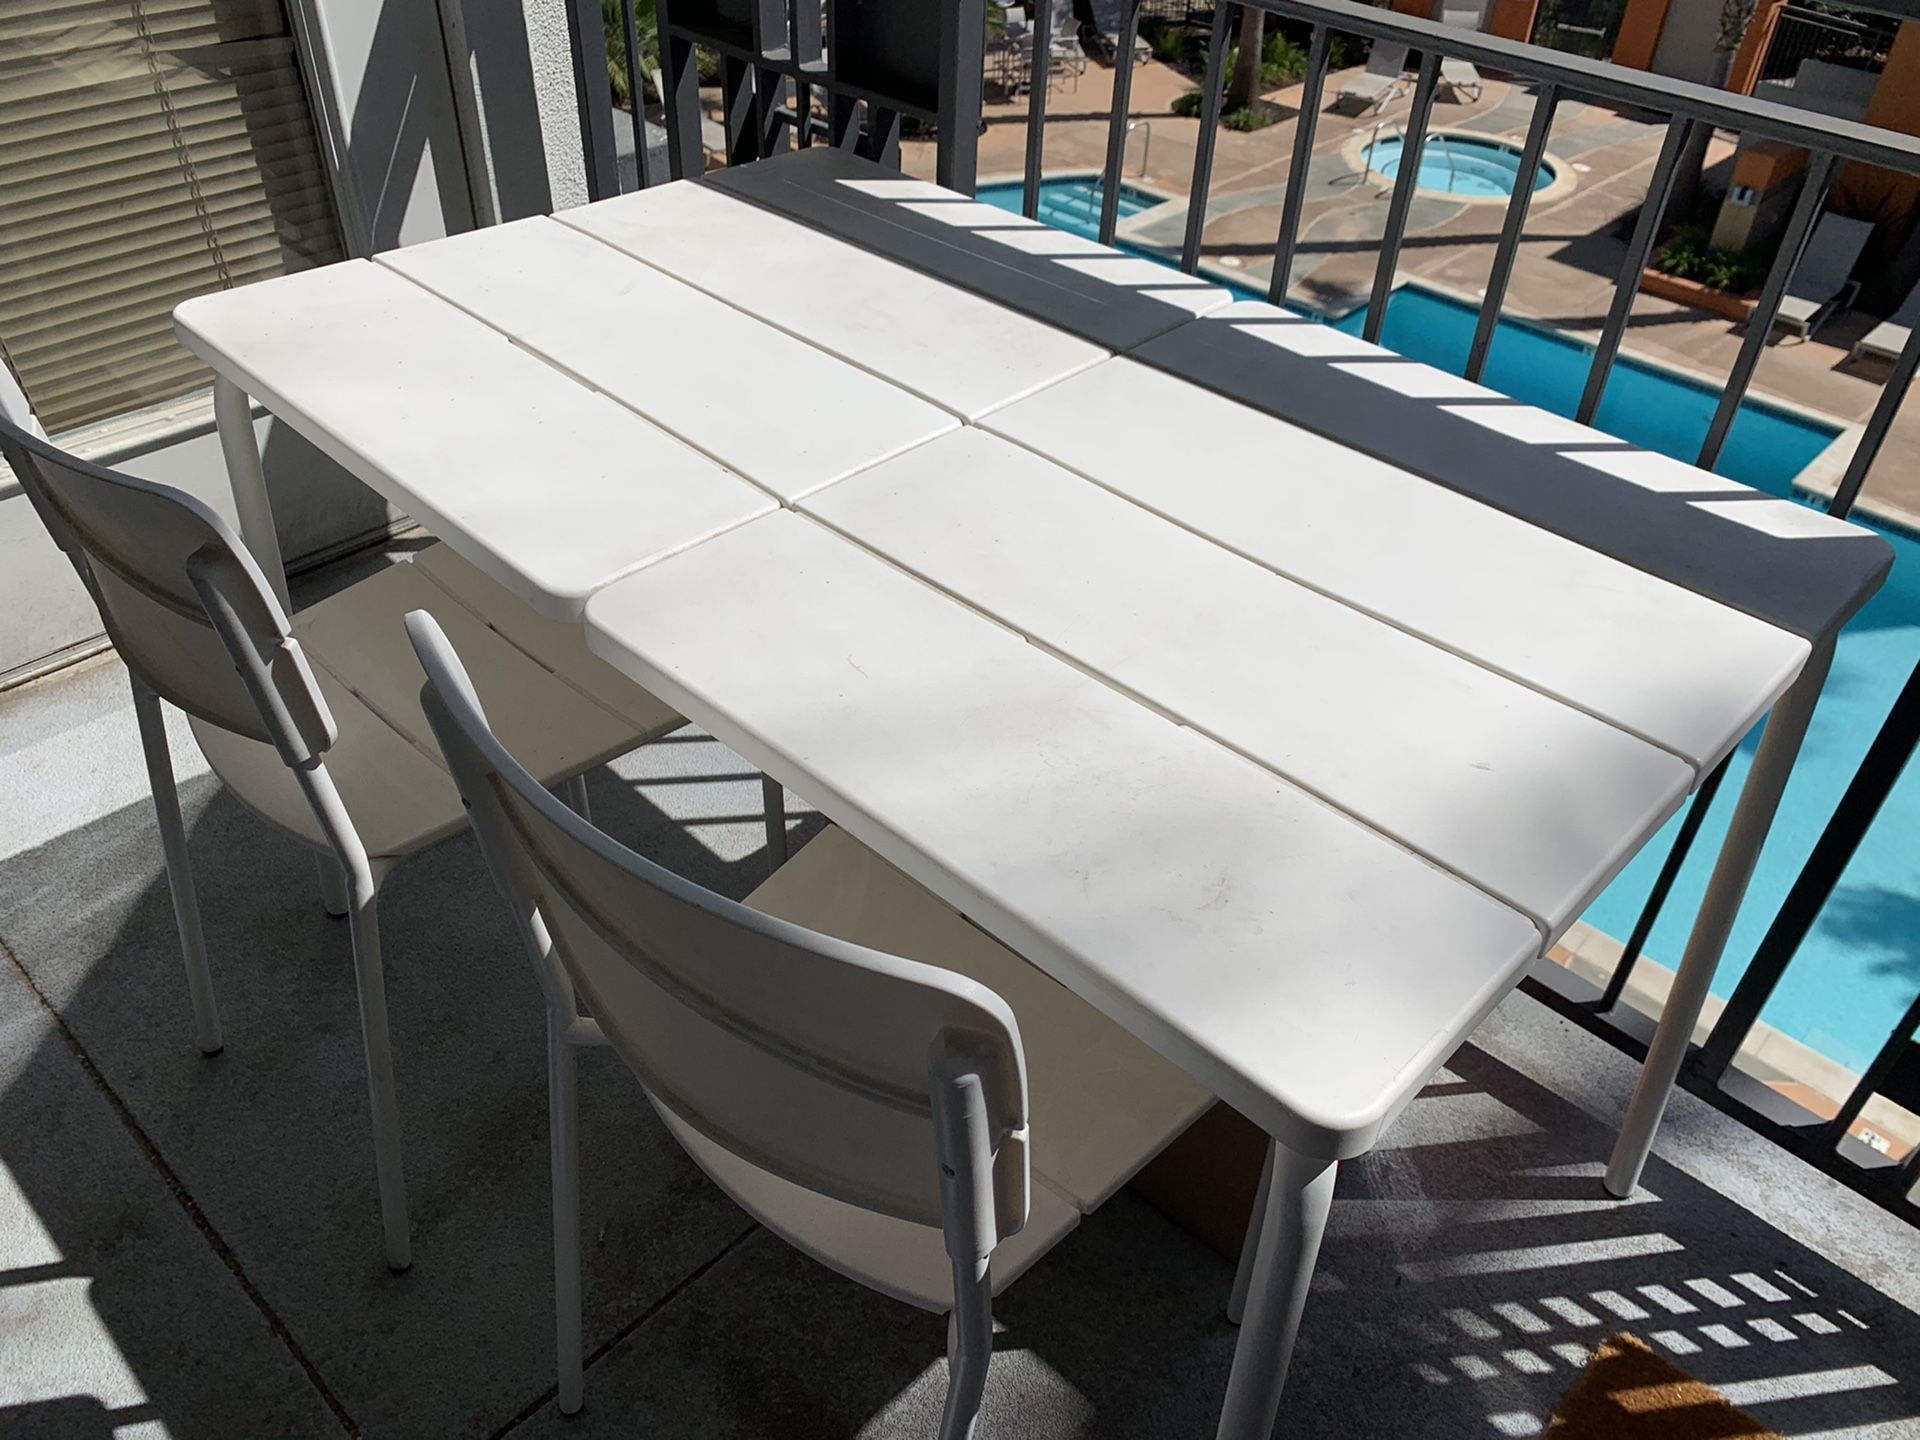 Ikea white Patio furniture (70% off) - one table, 2 chairs and 2 stools